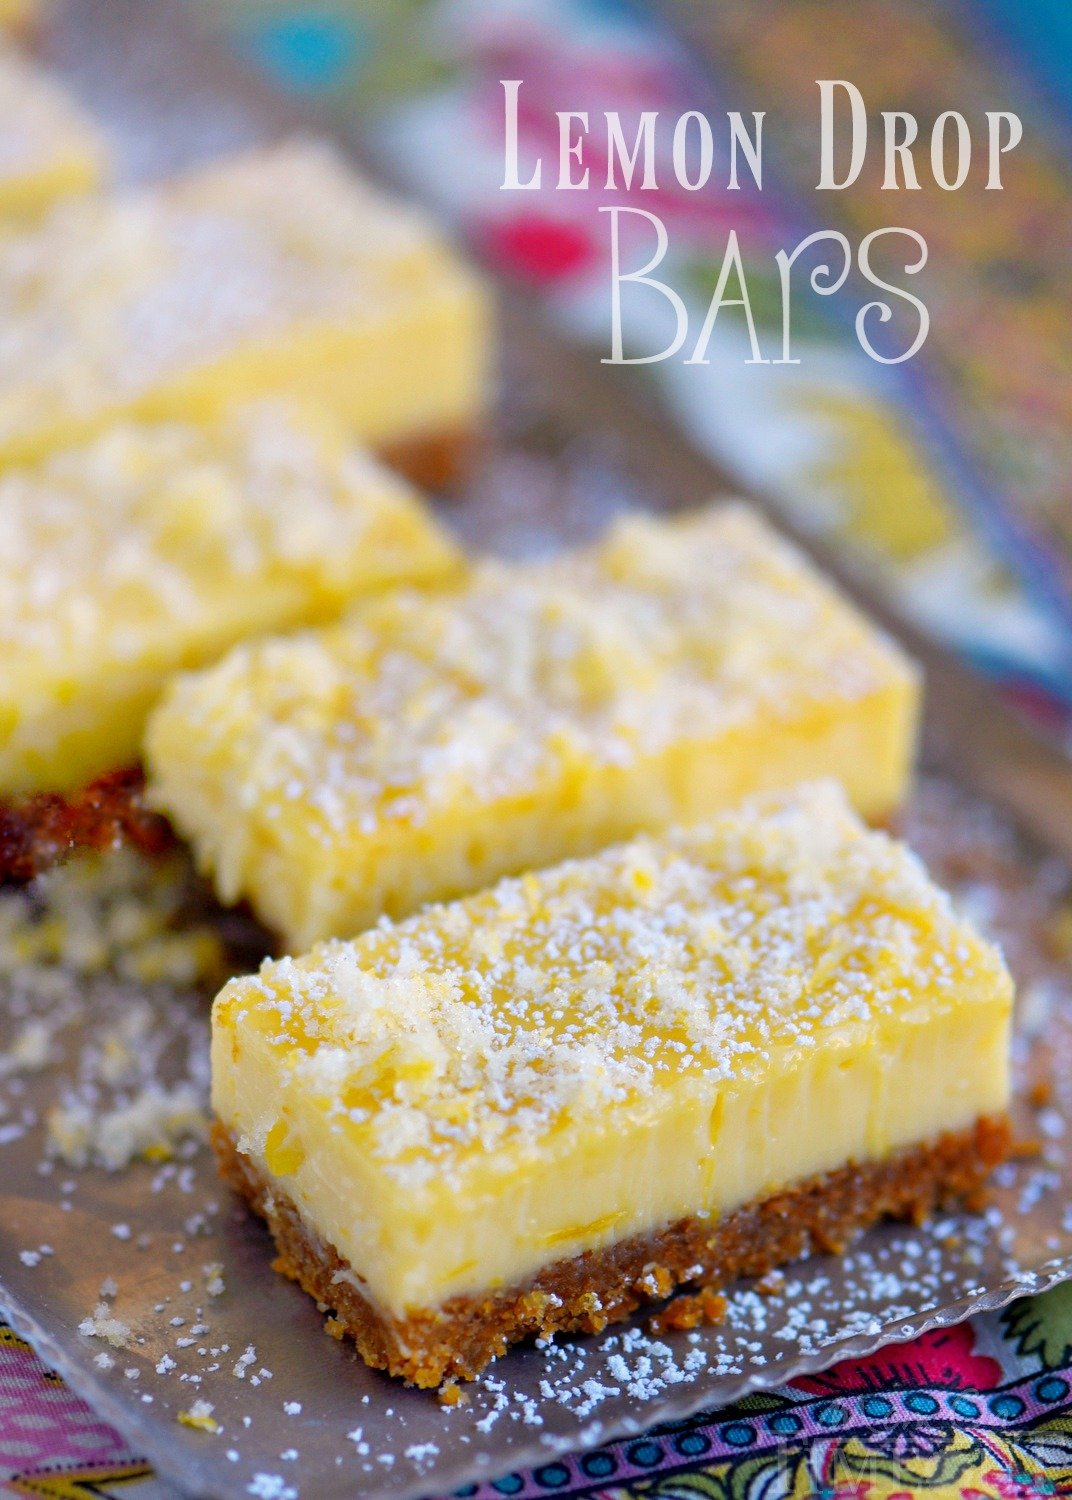 These Lemon Drop Bars are extra creamy and topped with candied lemon zest for the BIGGEST lemon flavor possible! So easy to make, deliciously sweet and tart, you'll find this treat hard to resist!